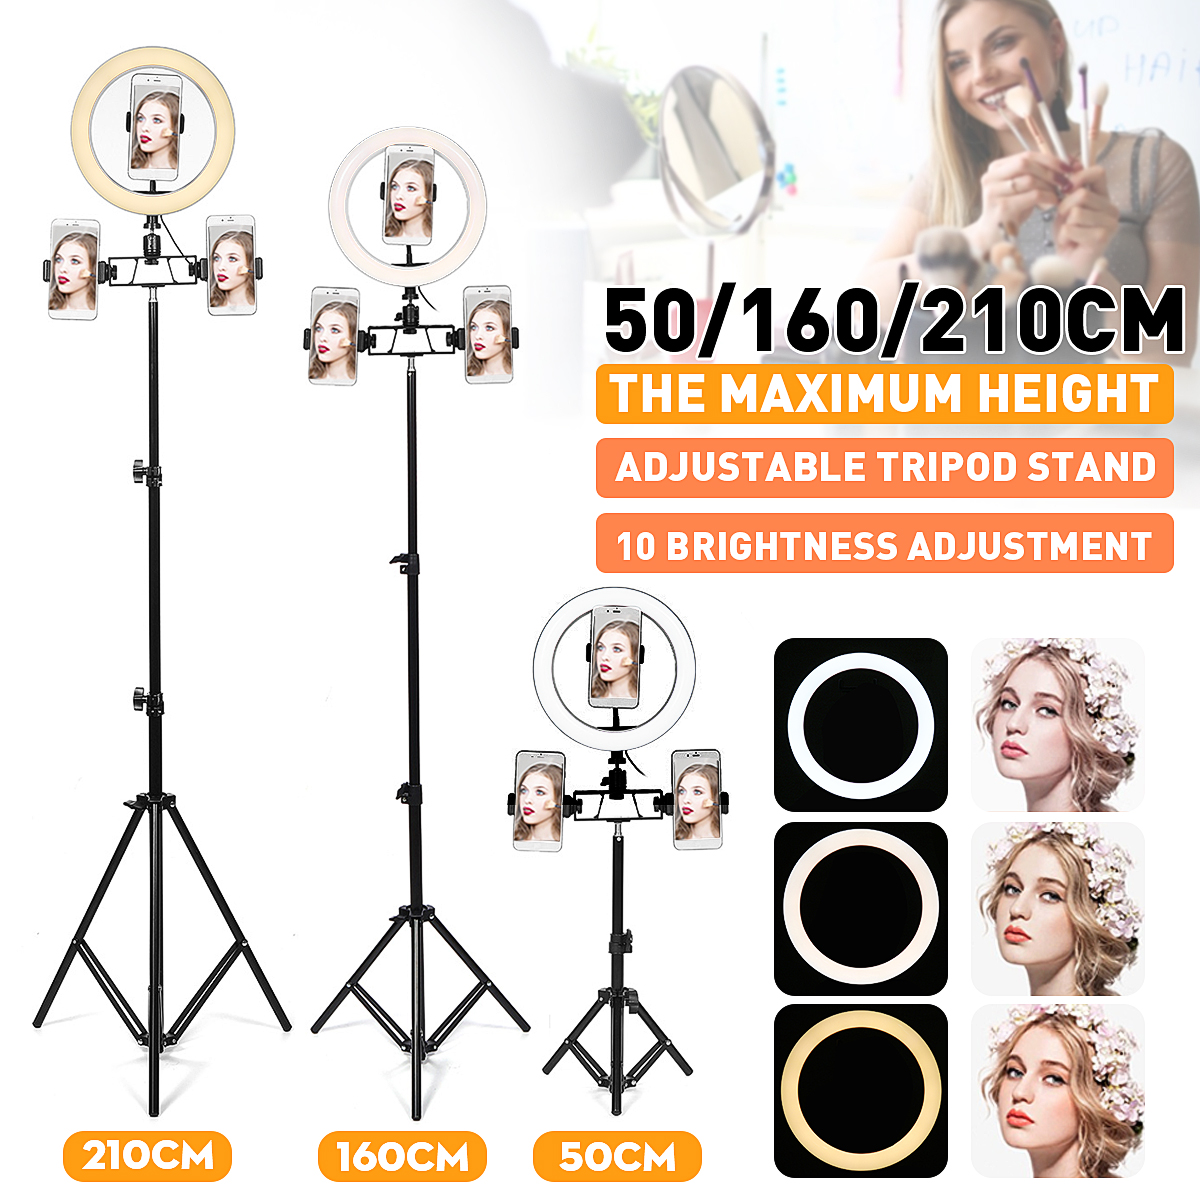 26cm-LED-Ring-Light-3-Color-10-Brightness-Dimmable-Fill-Light-with-Tripod-Stand-Dual-Phone-Clip-for--1702595-2